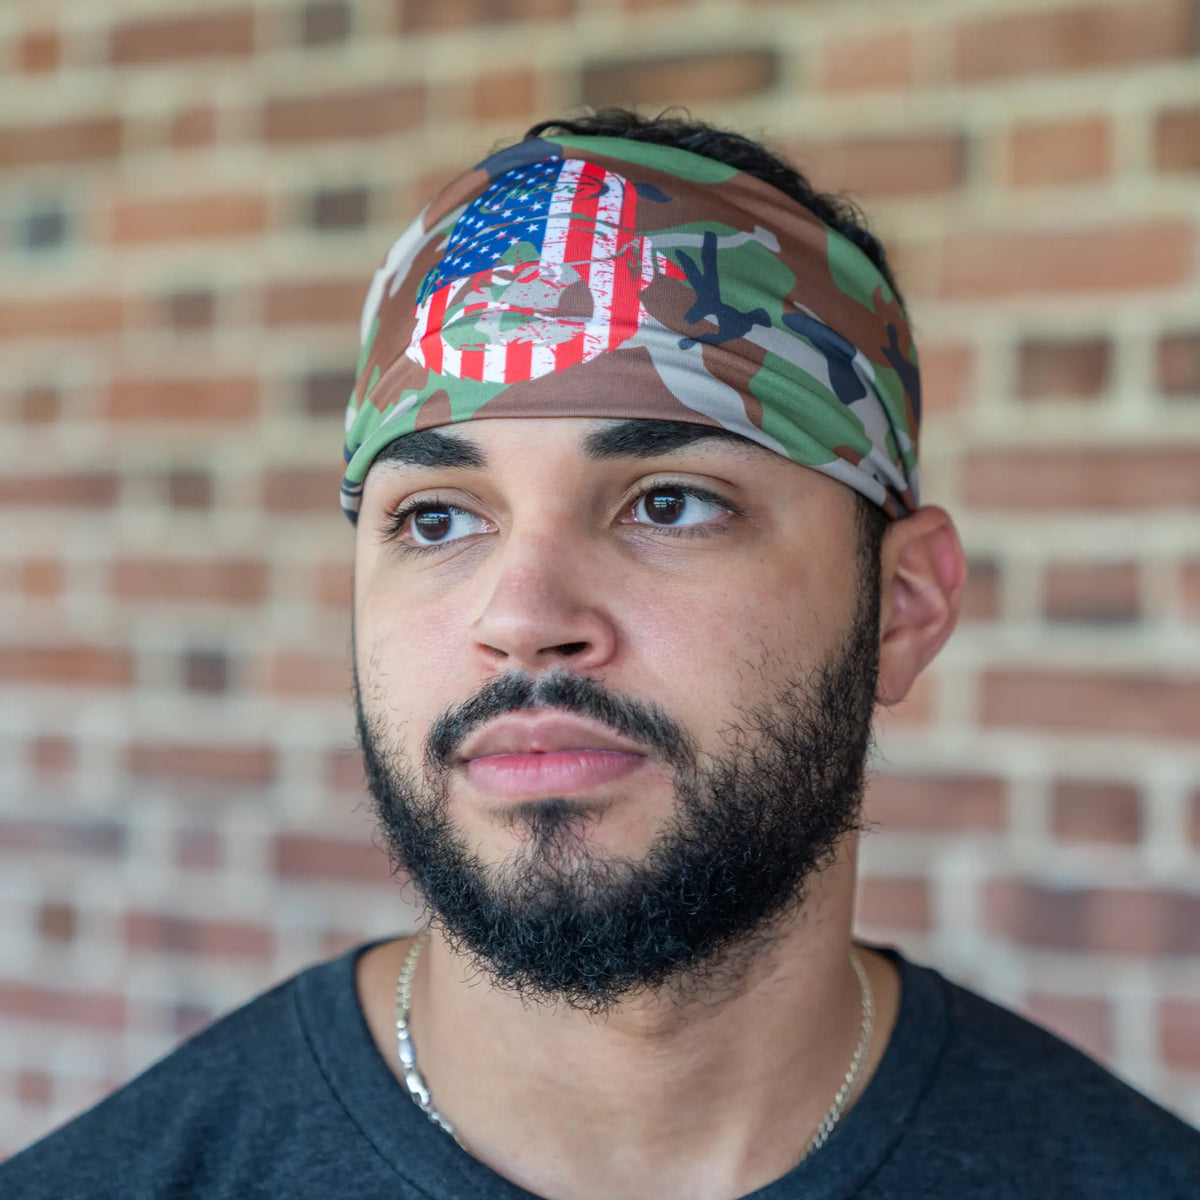 Focused baseball player wearing Tater Baseball&#39;s camo workout headband adorned with the American flag, blending athletic function with national pride in a casual setting.